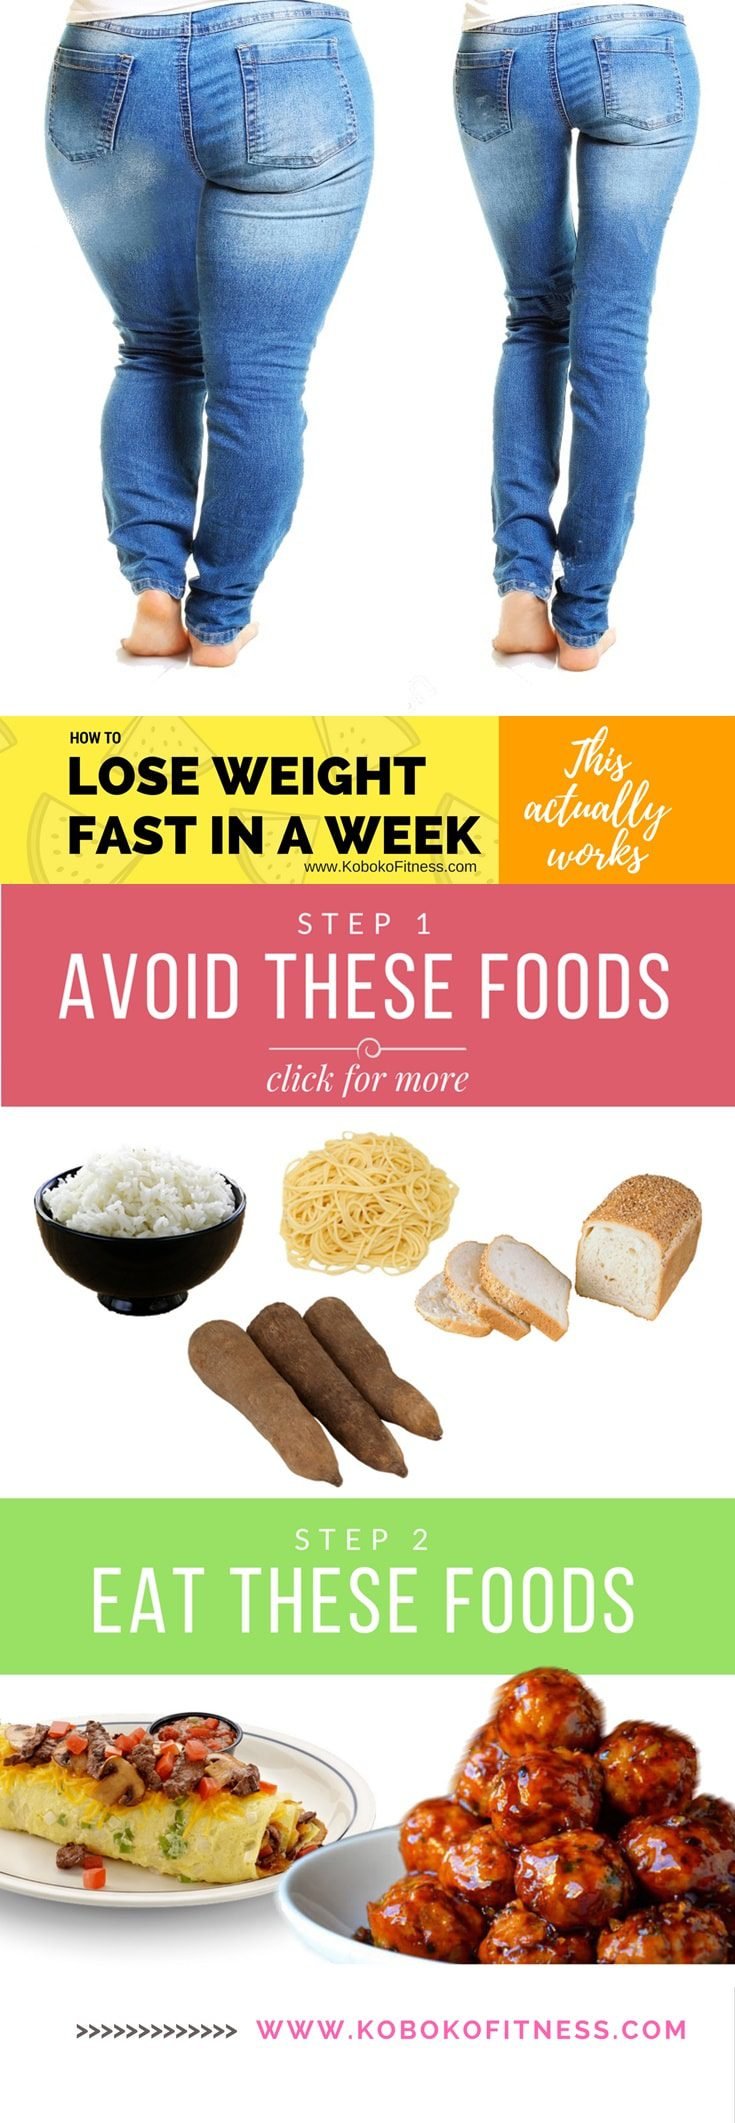 How to Loss Weight Fast